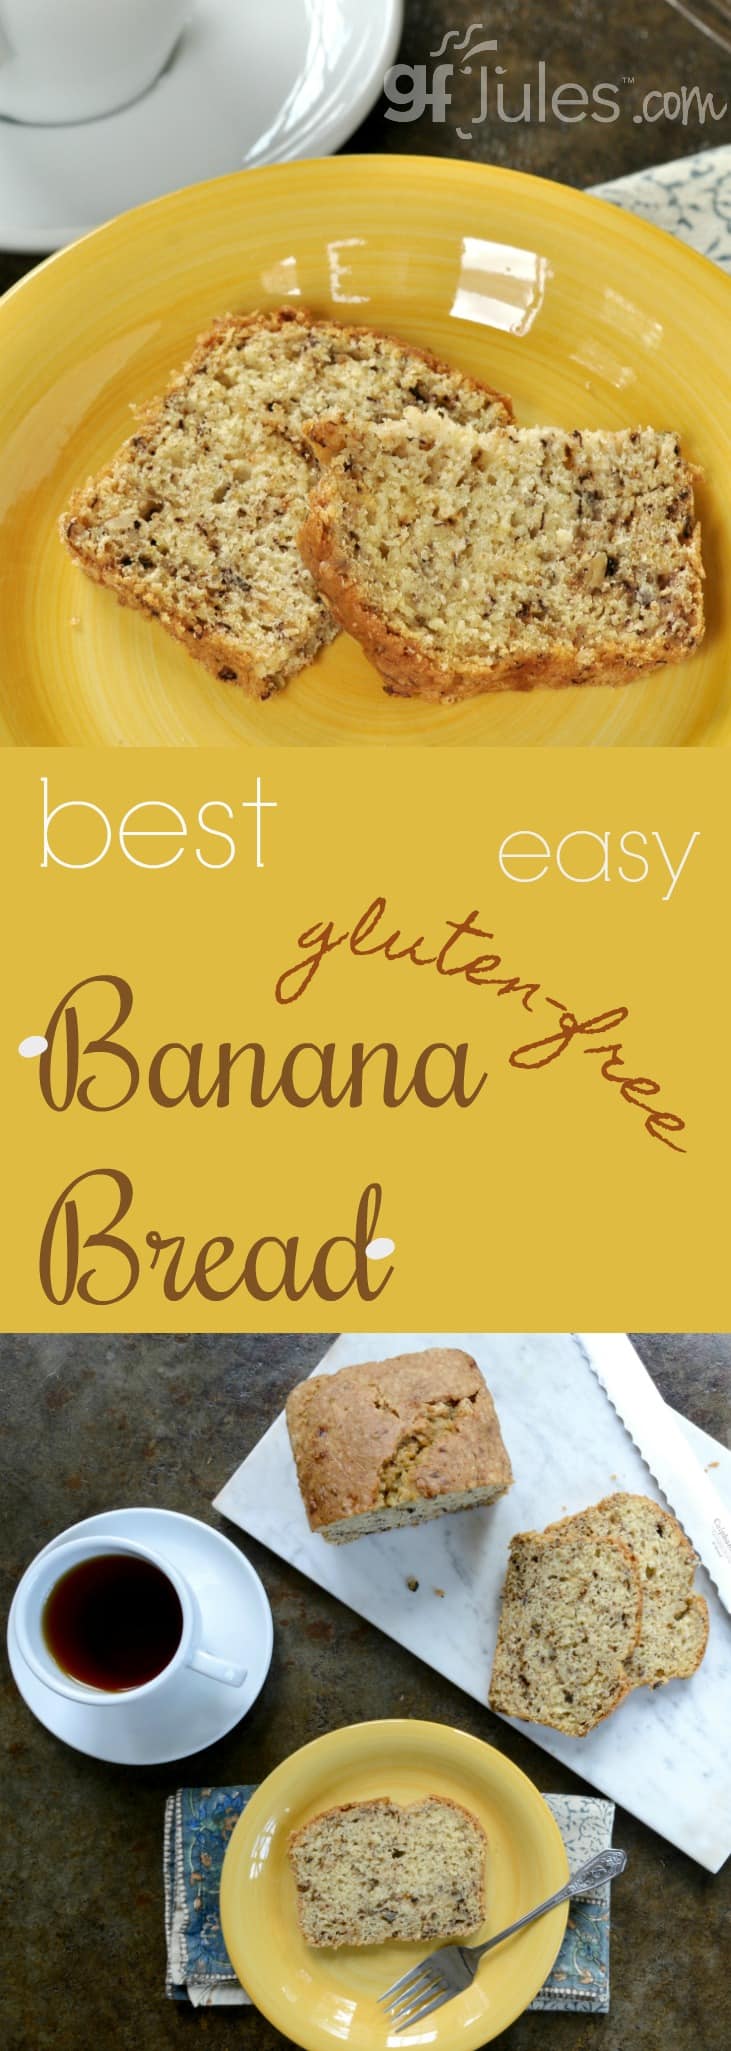 This easy recipe truly makes the best easy gluten free banana bread. And with my mix, it's so moist and delicious no one will ever suspect it's gluten free!| gfJules.com